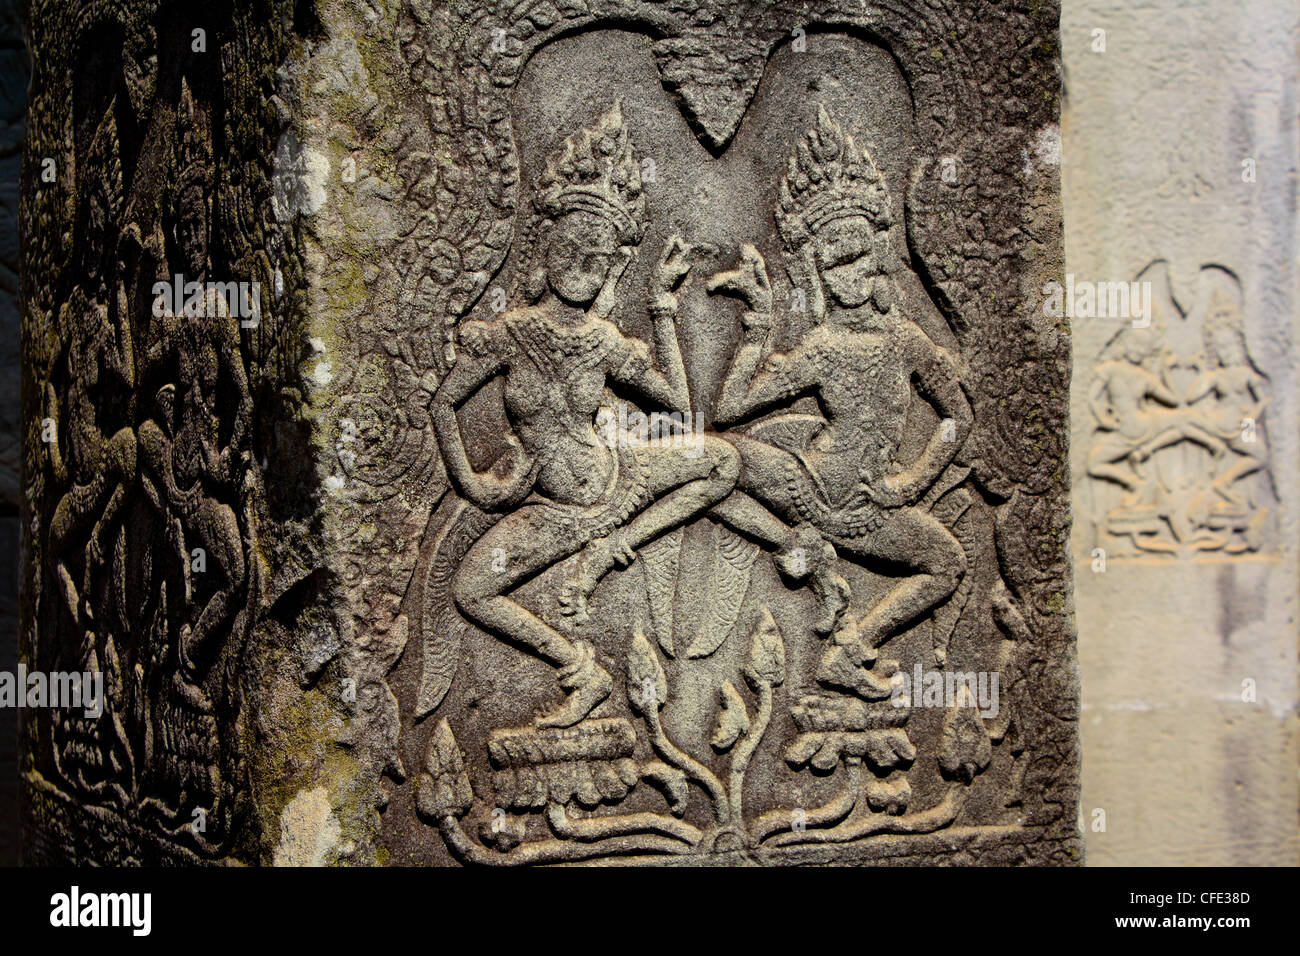 Excellent fine carving of Khmer relief work on a column in Ankor temple. Stock Photo